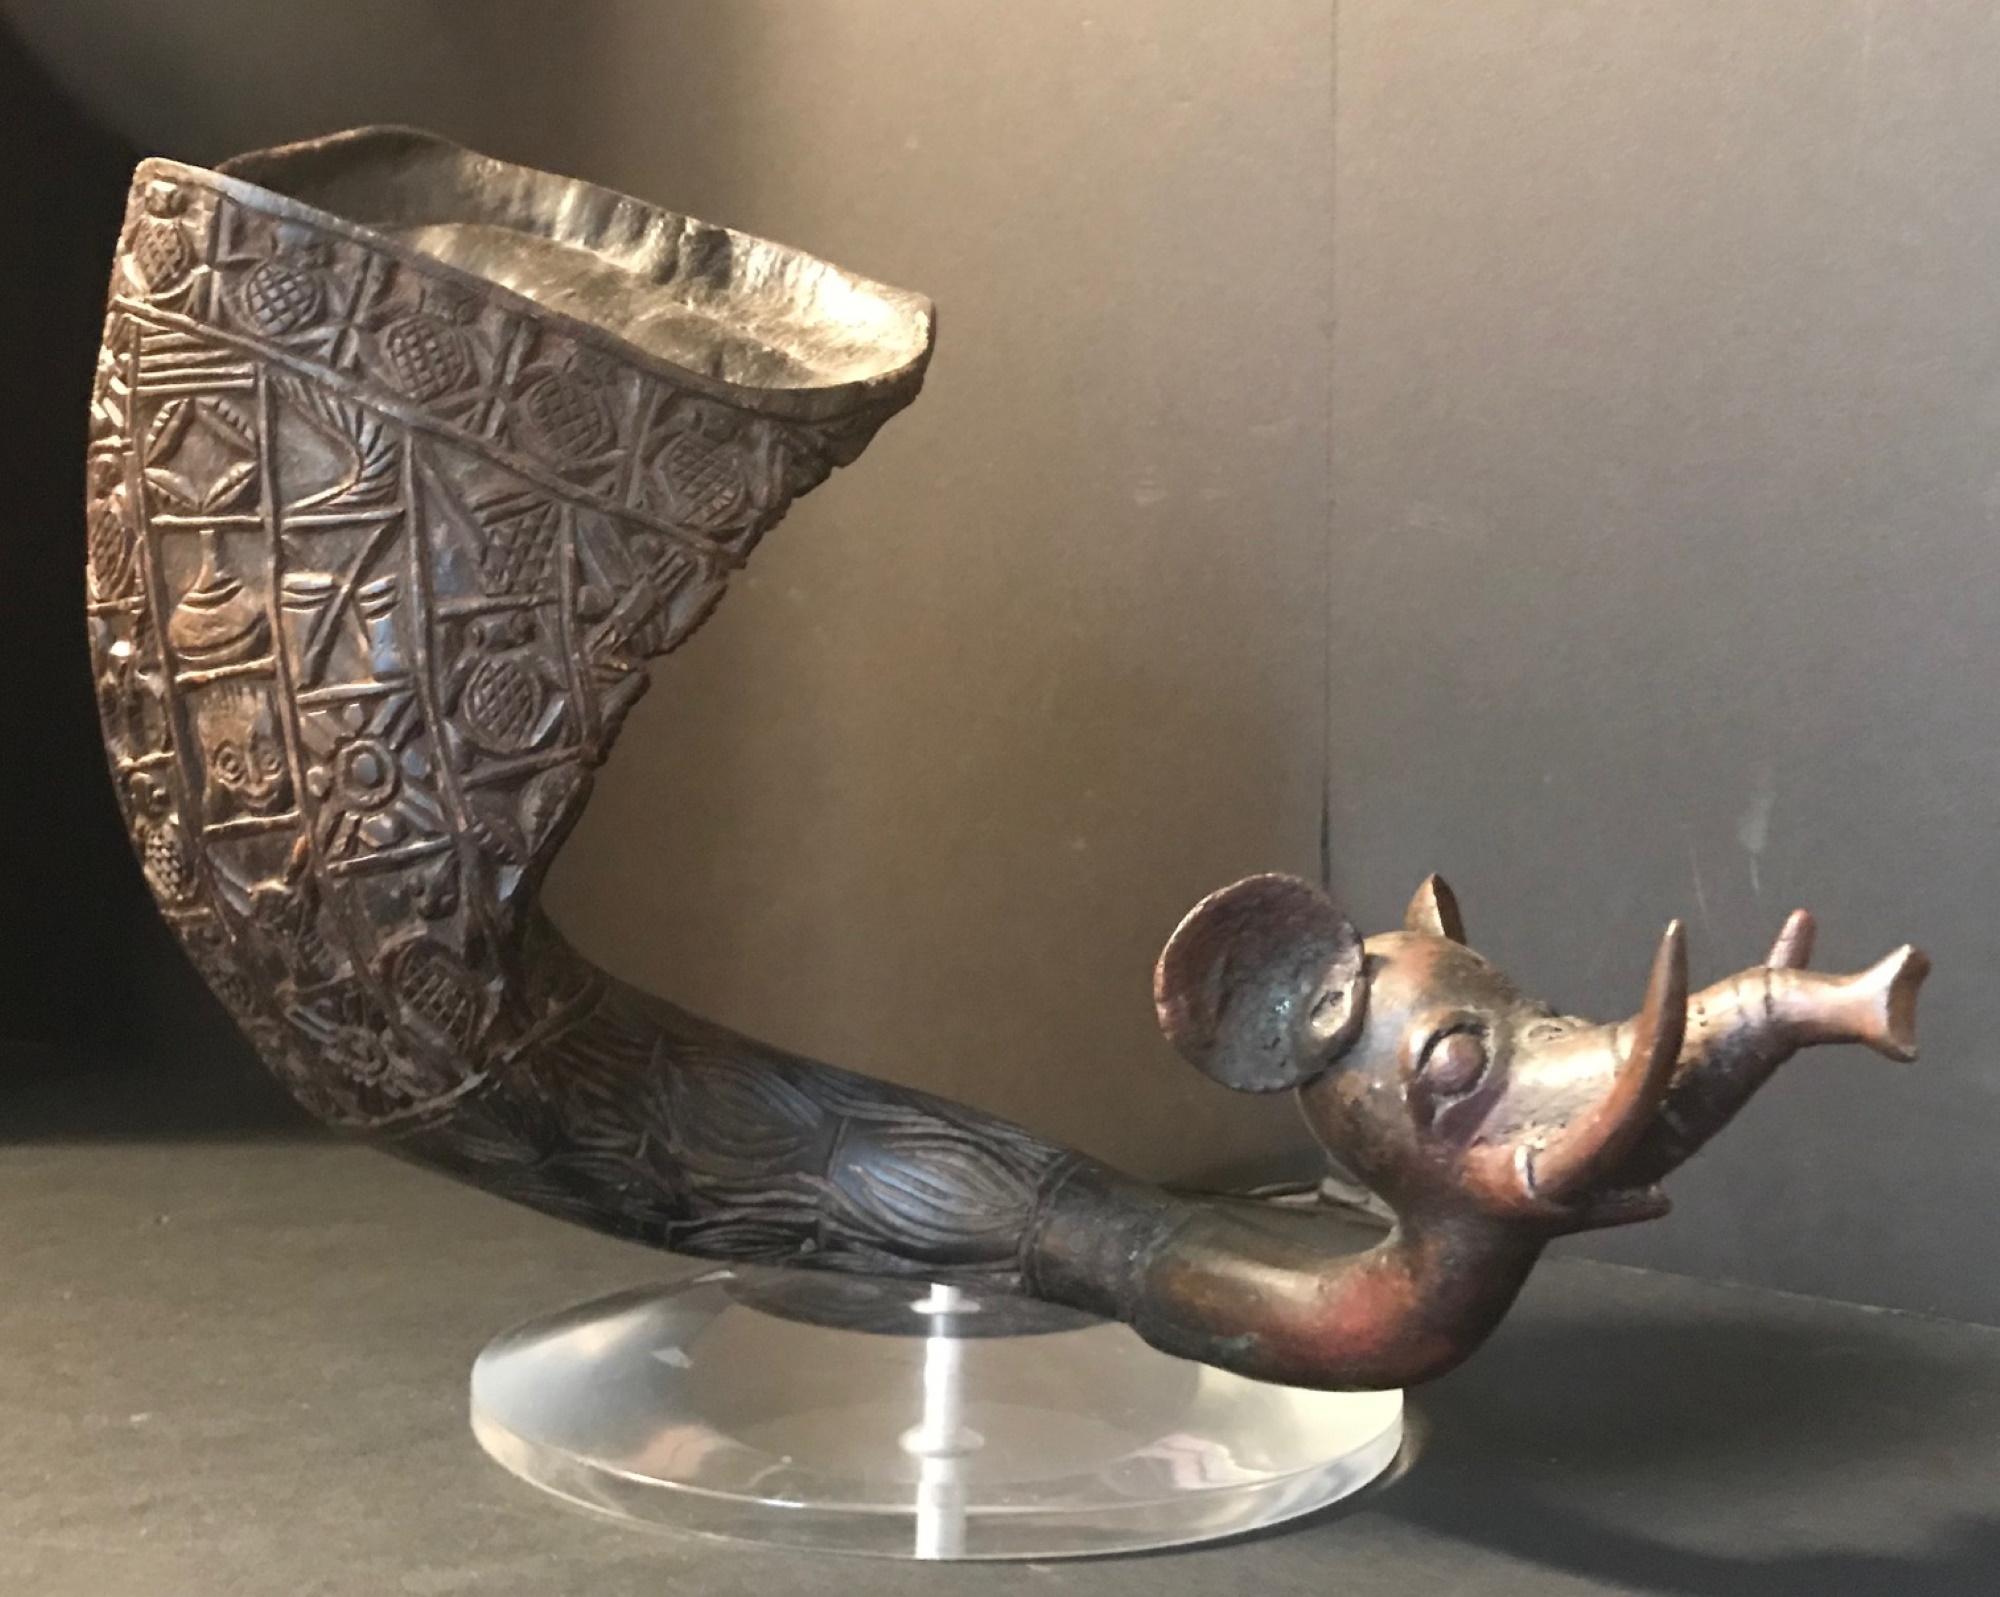 Antique African Royal ceremonial buffalo drinking horn Bamum “Ndu Nyiet”

This historic and spectacular Bamum royal drinking horn is known as “Ndu Nyiet”. It is carved, exquisitely, from buffalo horn and decorated overall in relief with geometric